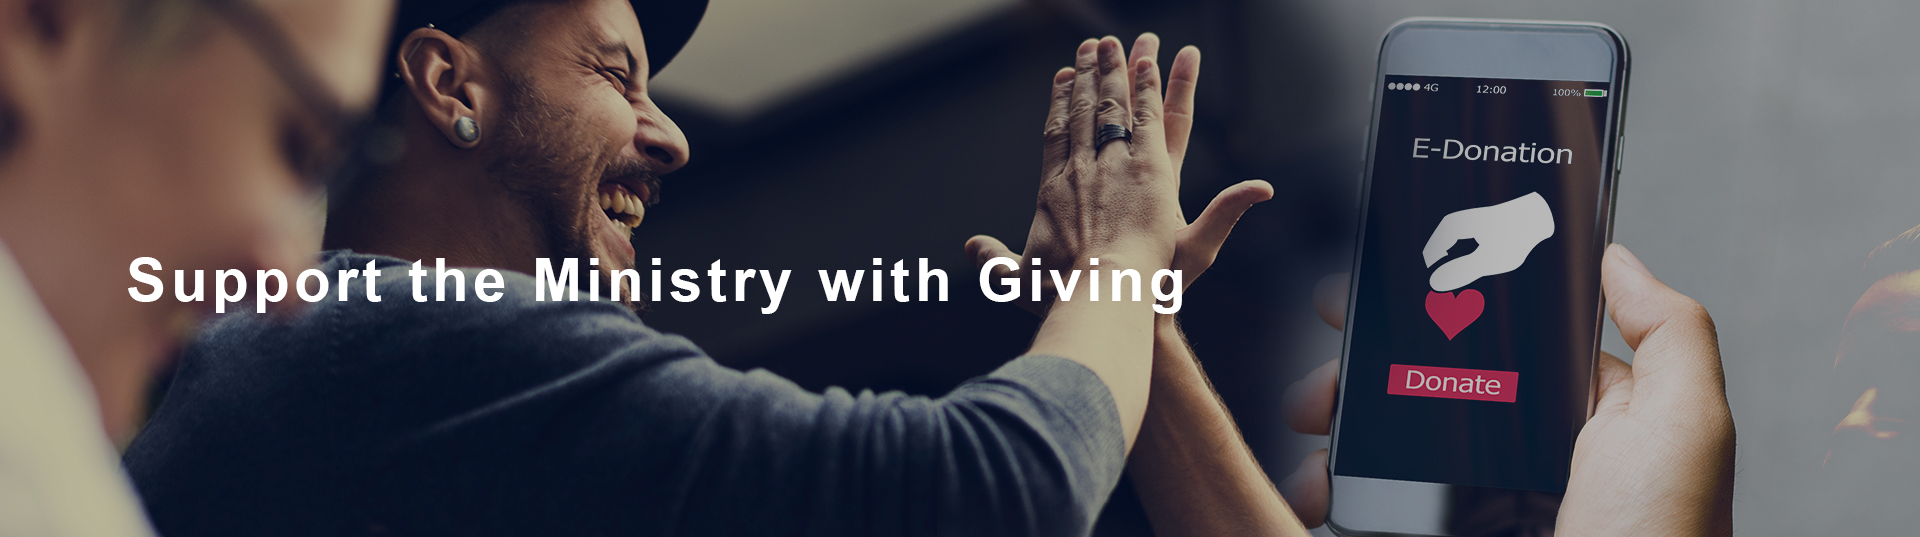 Support the Ministry with Giving